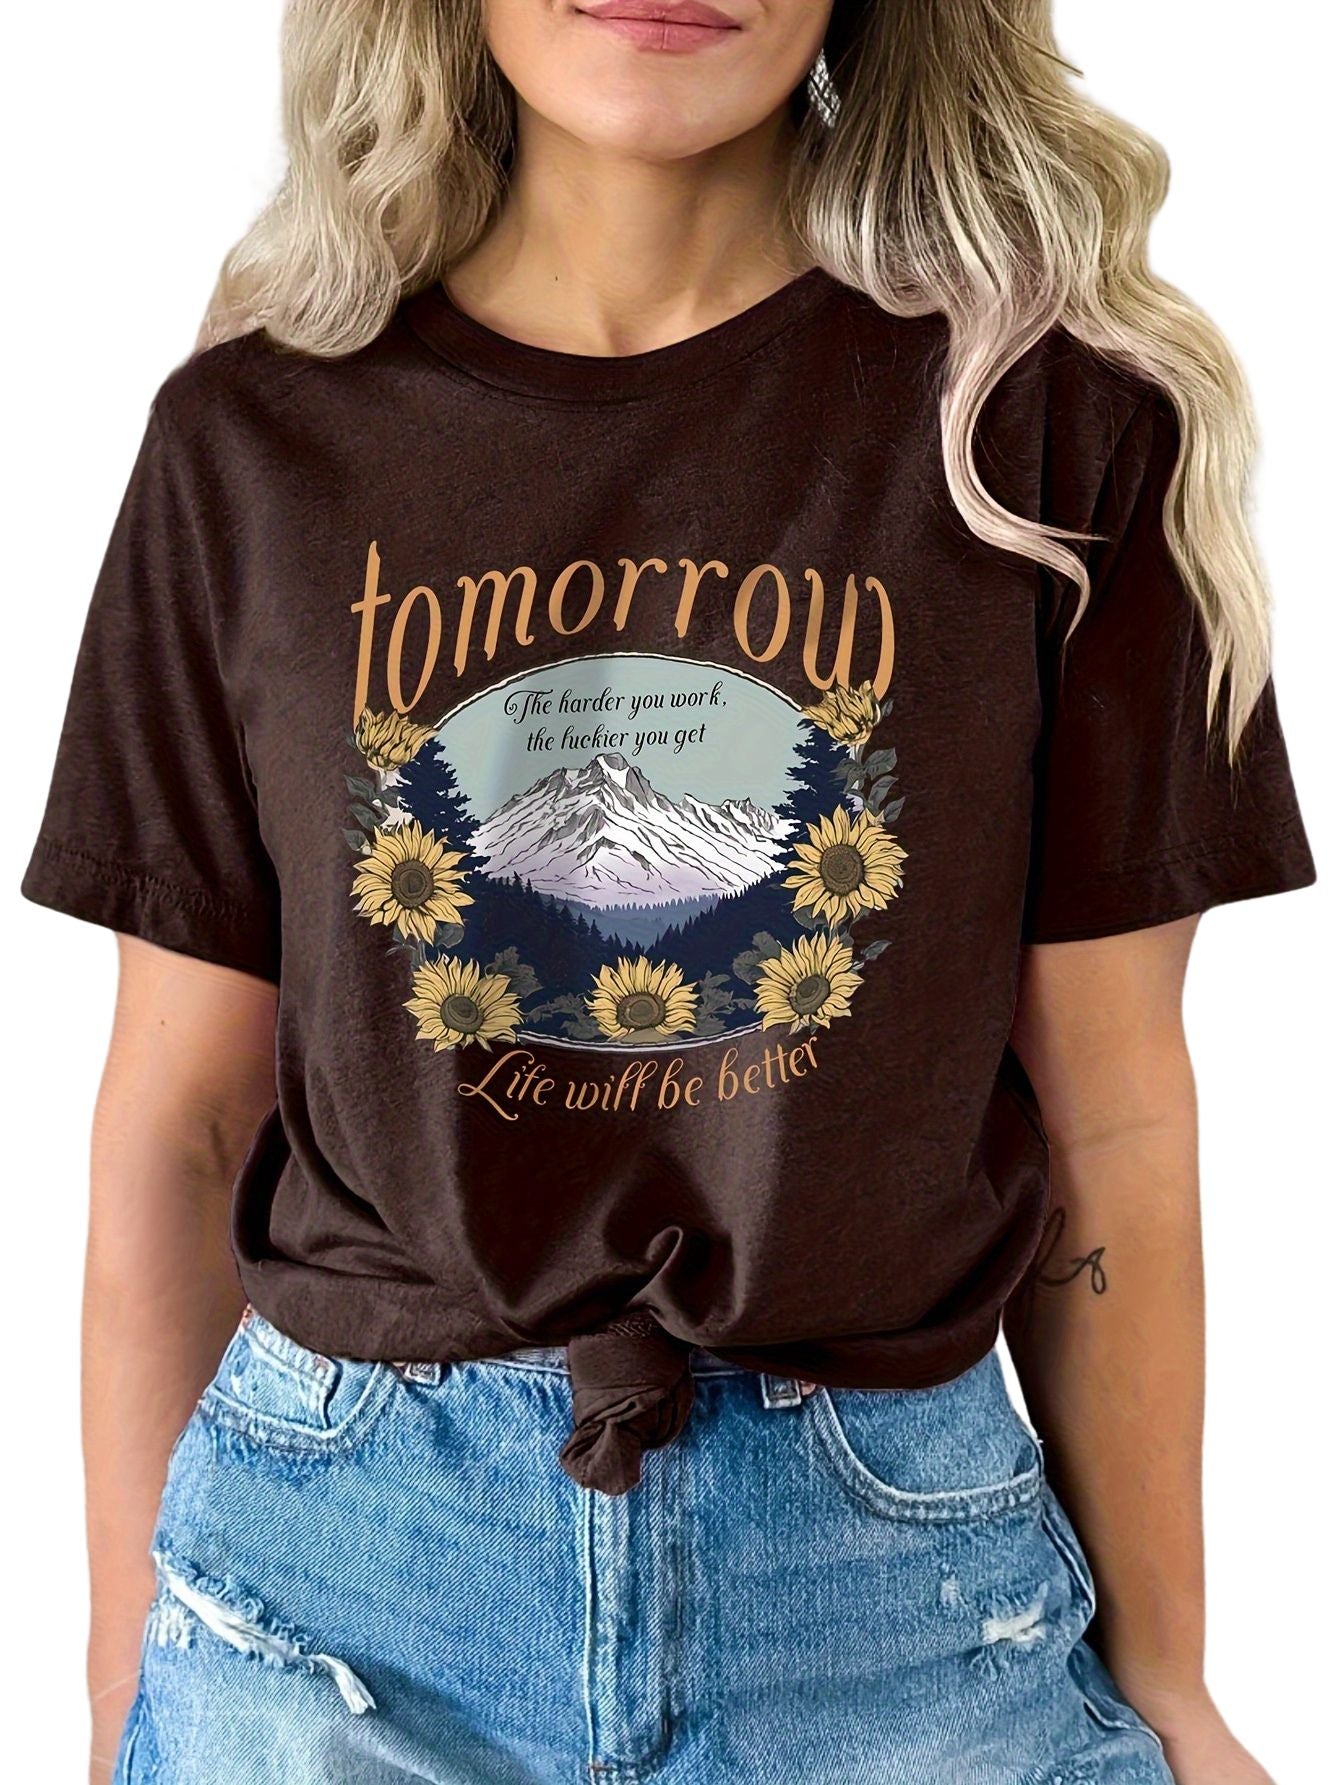 Mountain & Sunflower Print T-shirt, Casual Crew Neck Short Sleeve Top For Spring & Summer, Women's Clothing